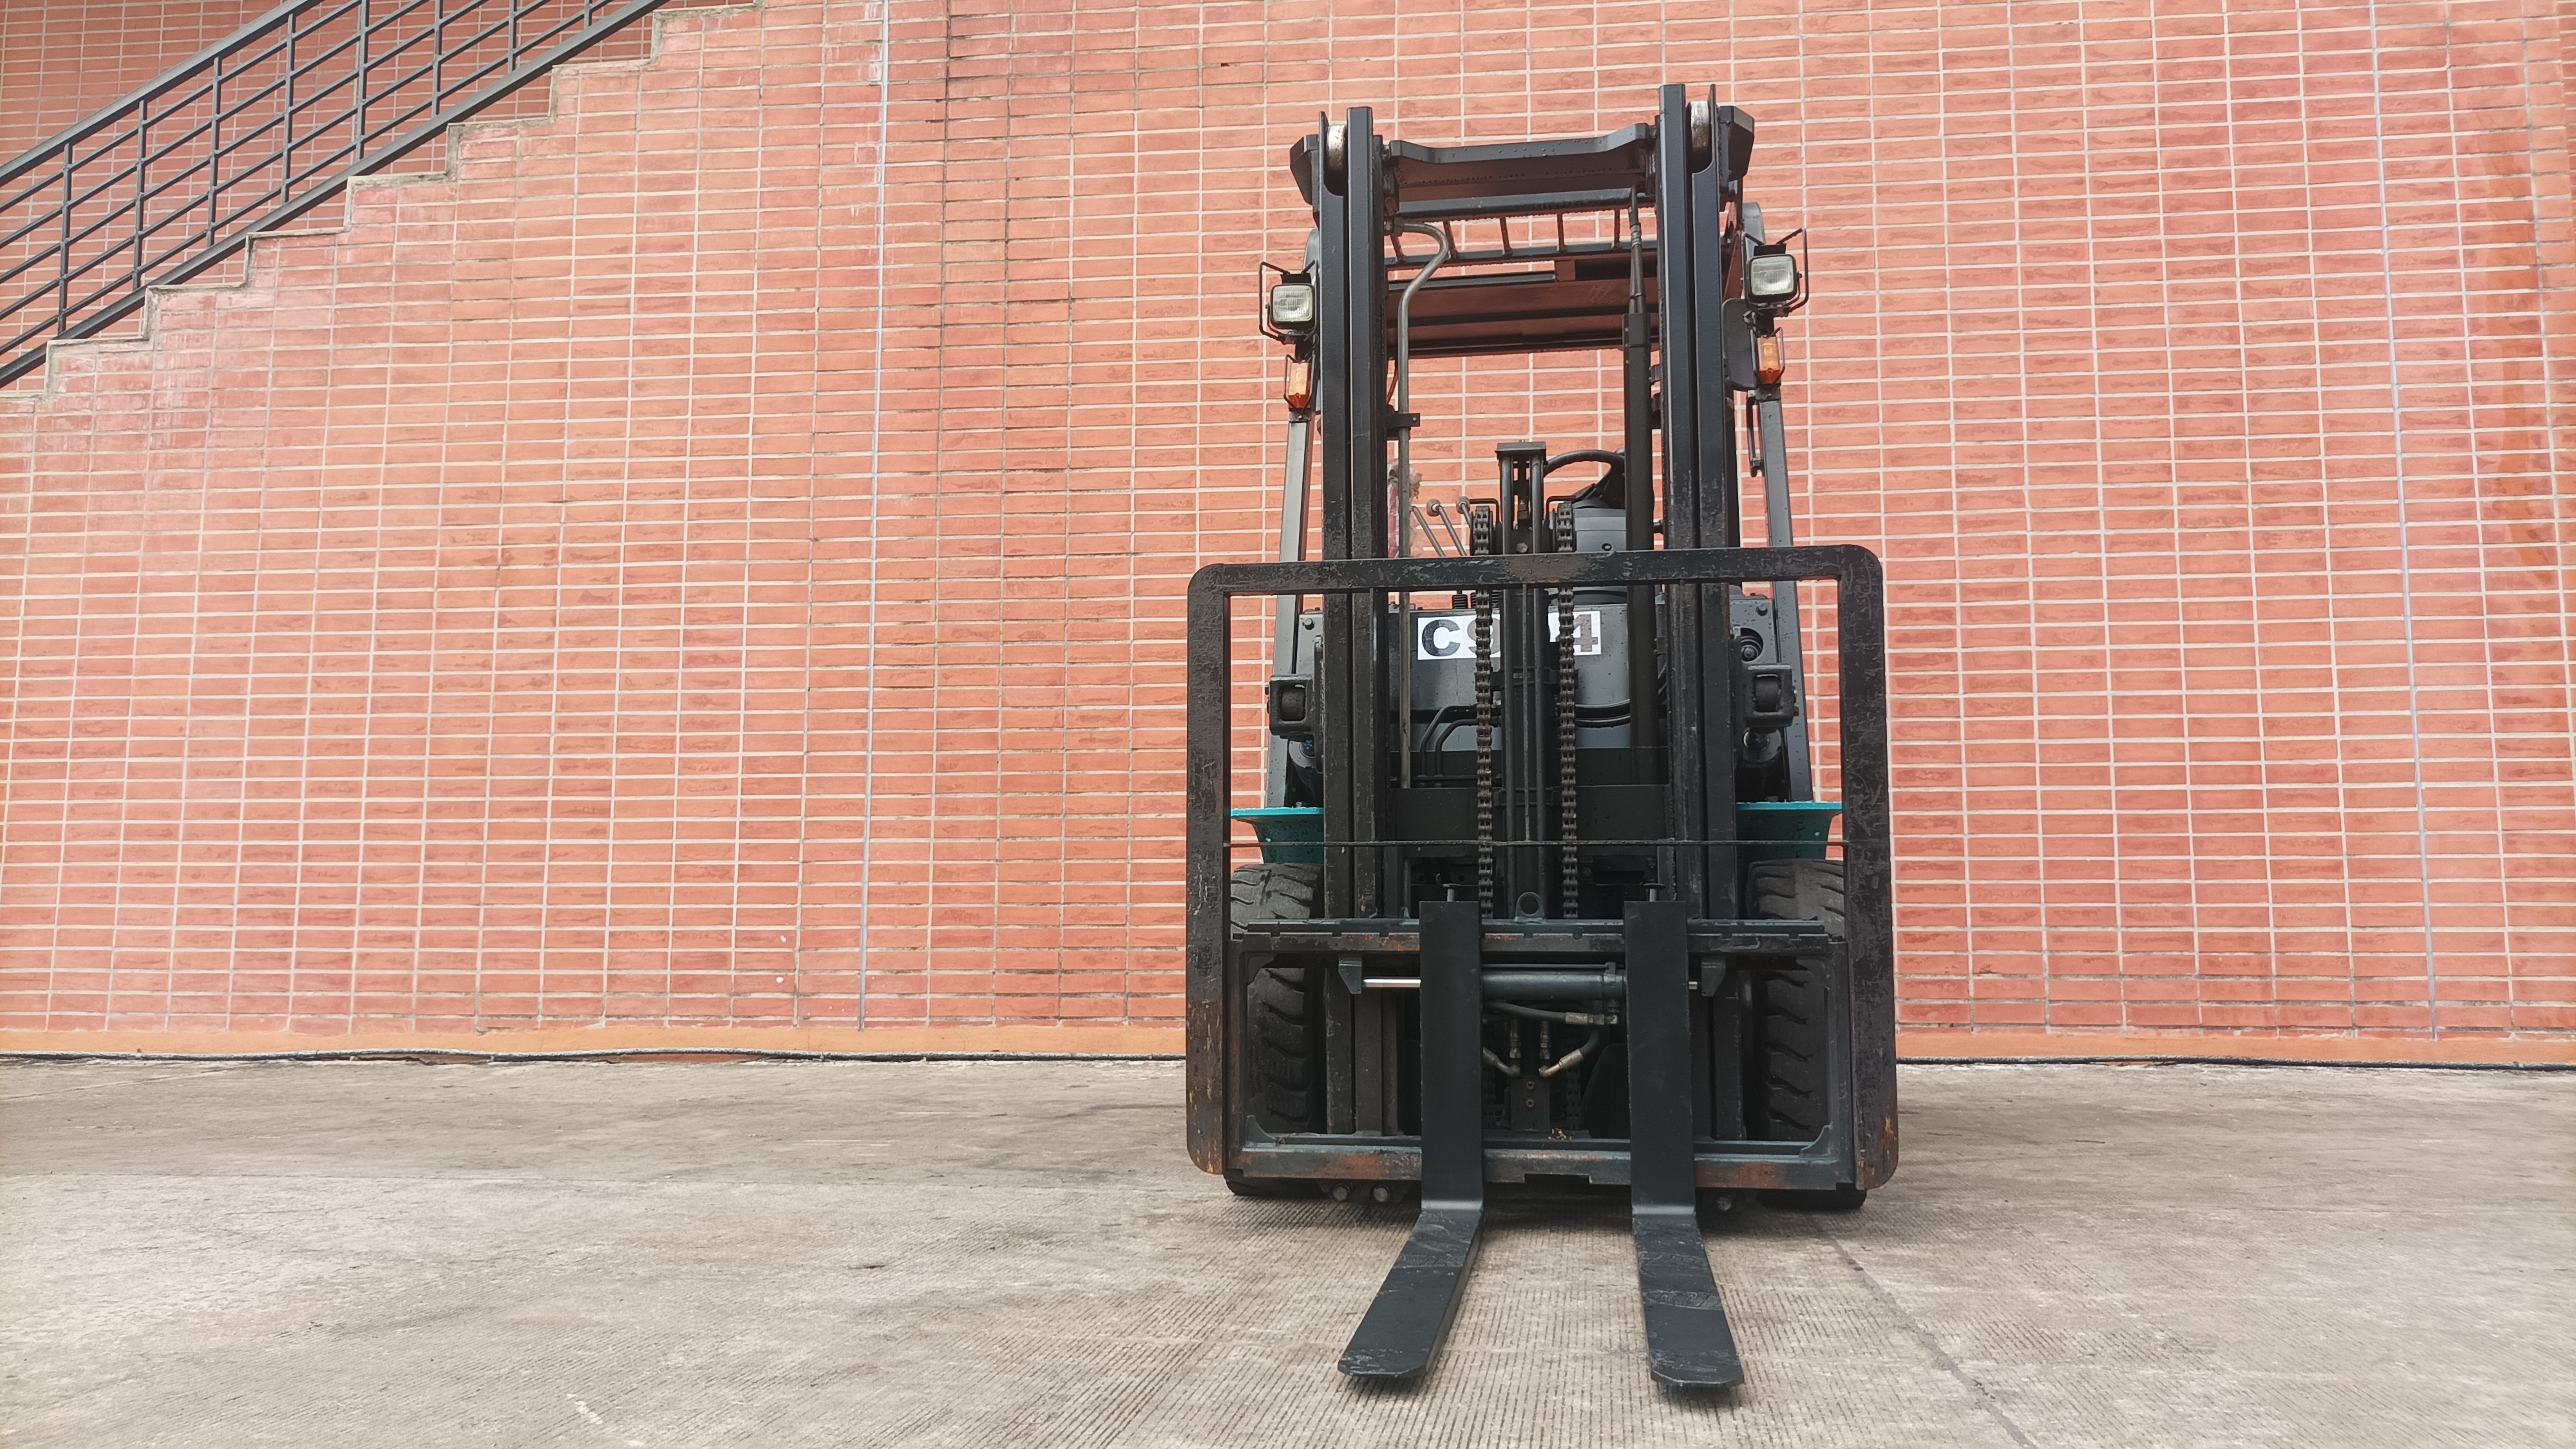 SUMITOMO FORKLIFT COUNTER 8FB20PXIII-VF300, ELECTRIC, 2.0